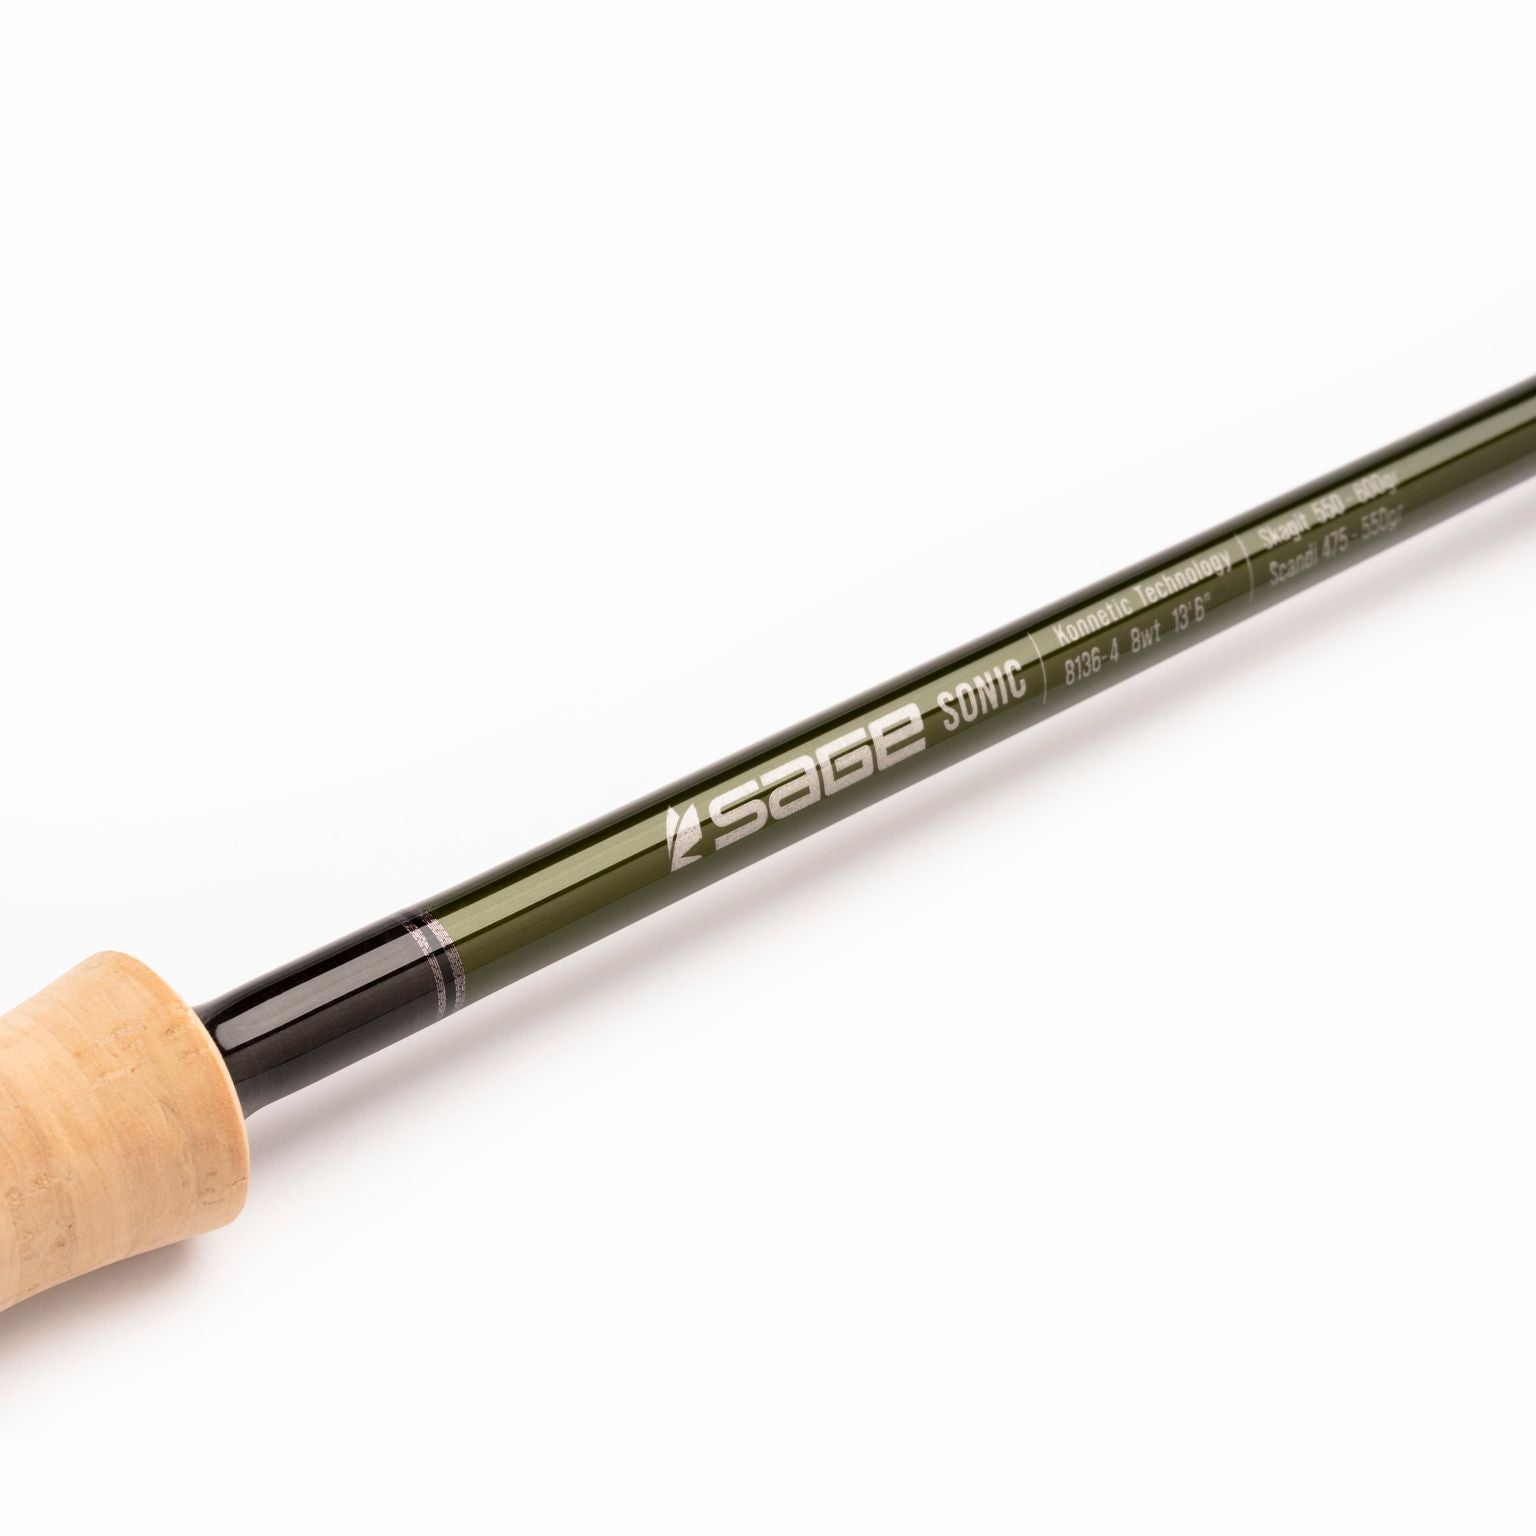 Sage Sonic Double Handed Fly Rods